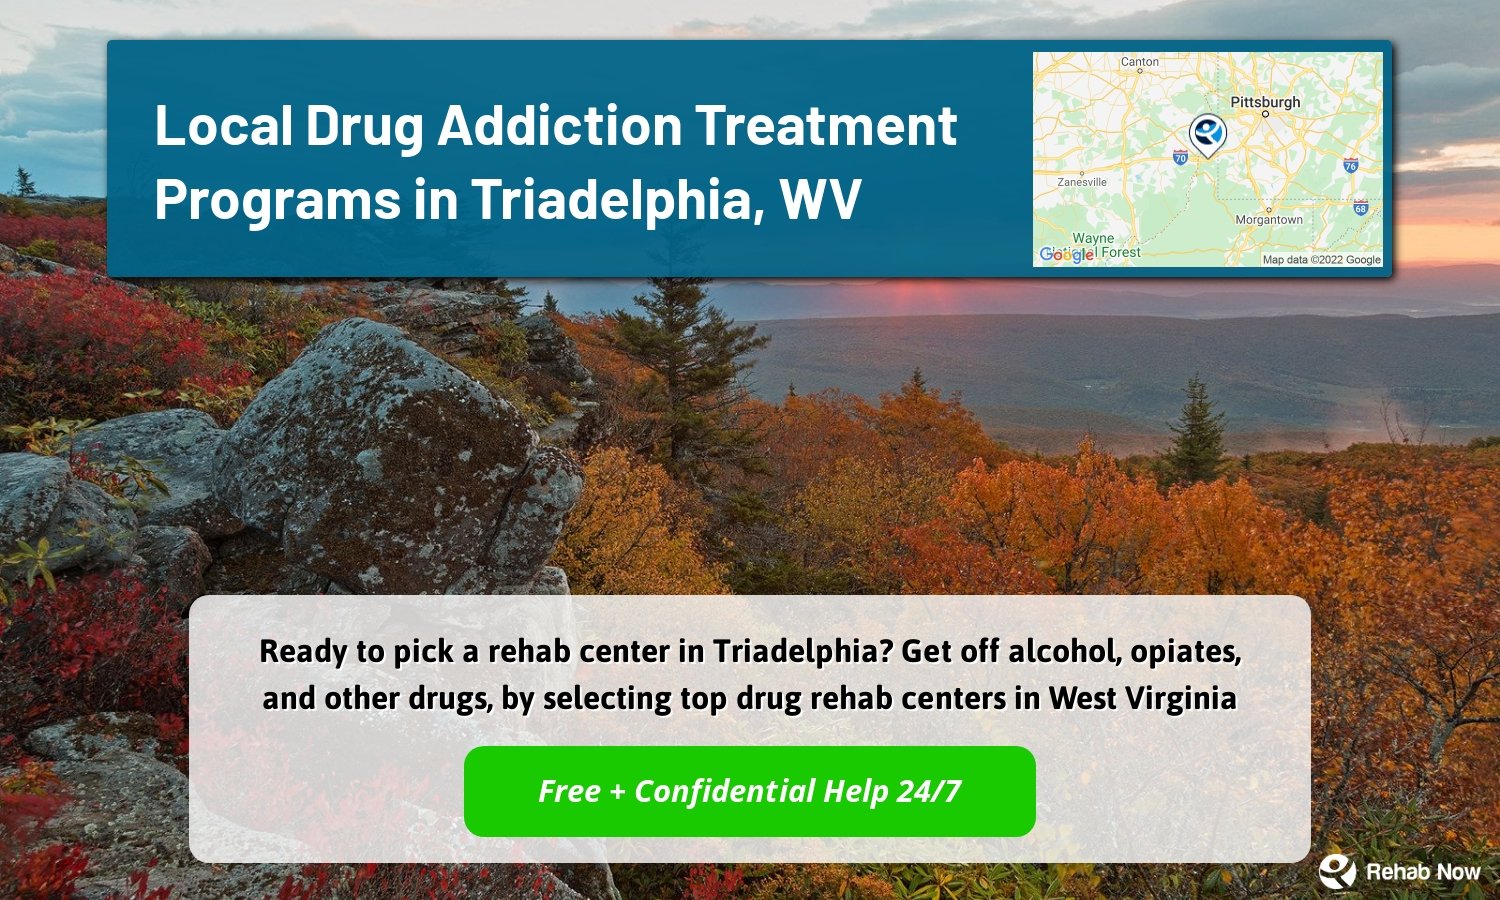 Ready to pick a rehab center in Triadelphia? Get off alcohol, opiates, and other drugs, by selecting top drug rehab centers in West Virginia